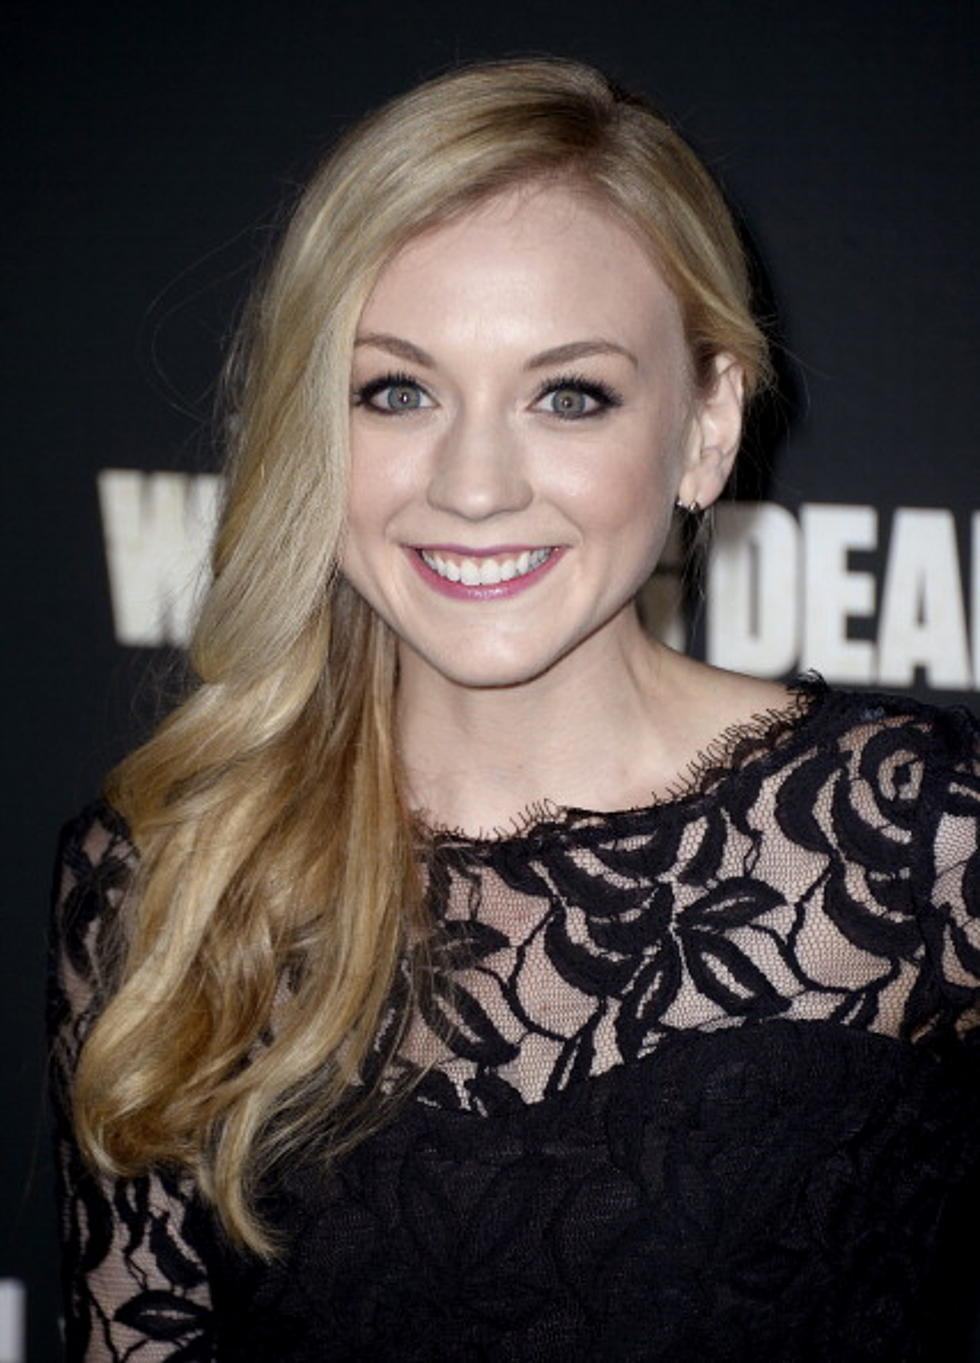 ‘The Walking Dead’s’ Emily Kinney Will Be Live in Omaha This Summer